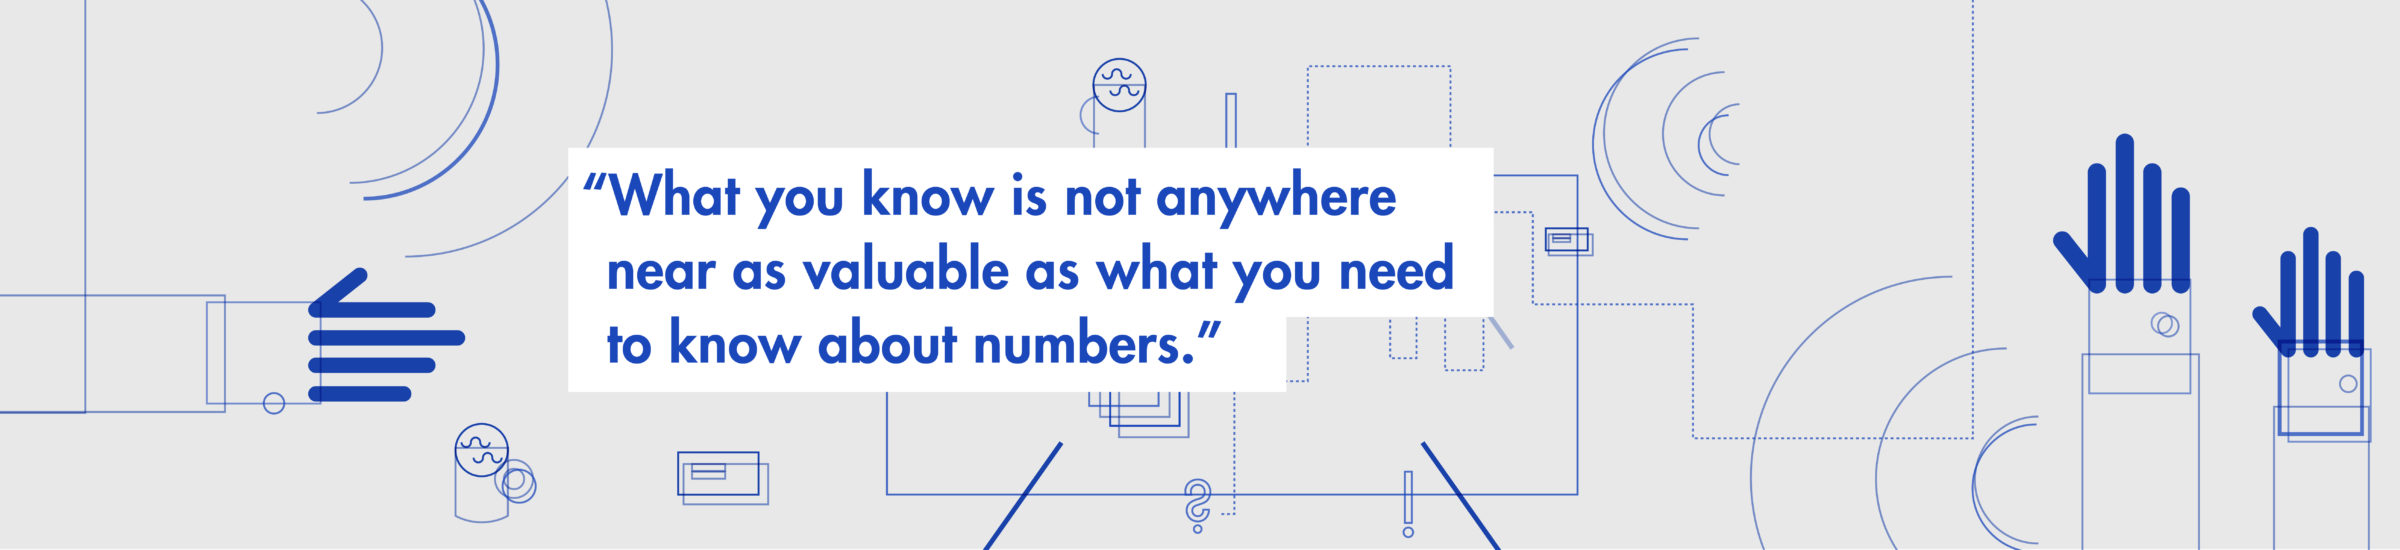 "What you know is not anywhere near as valuable as what you need to know about numbers."